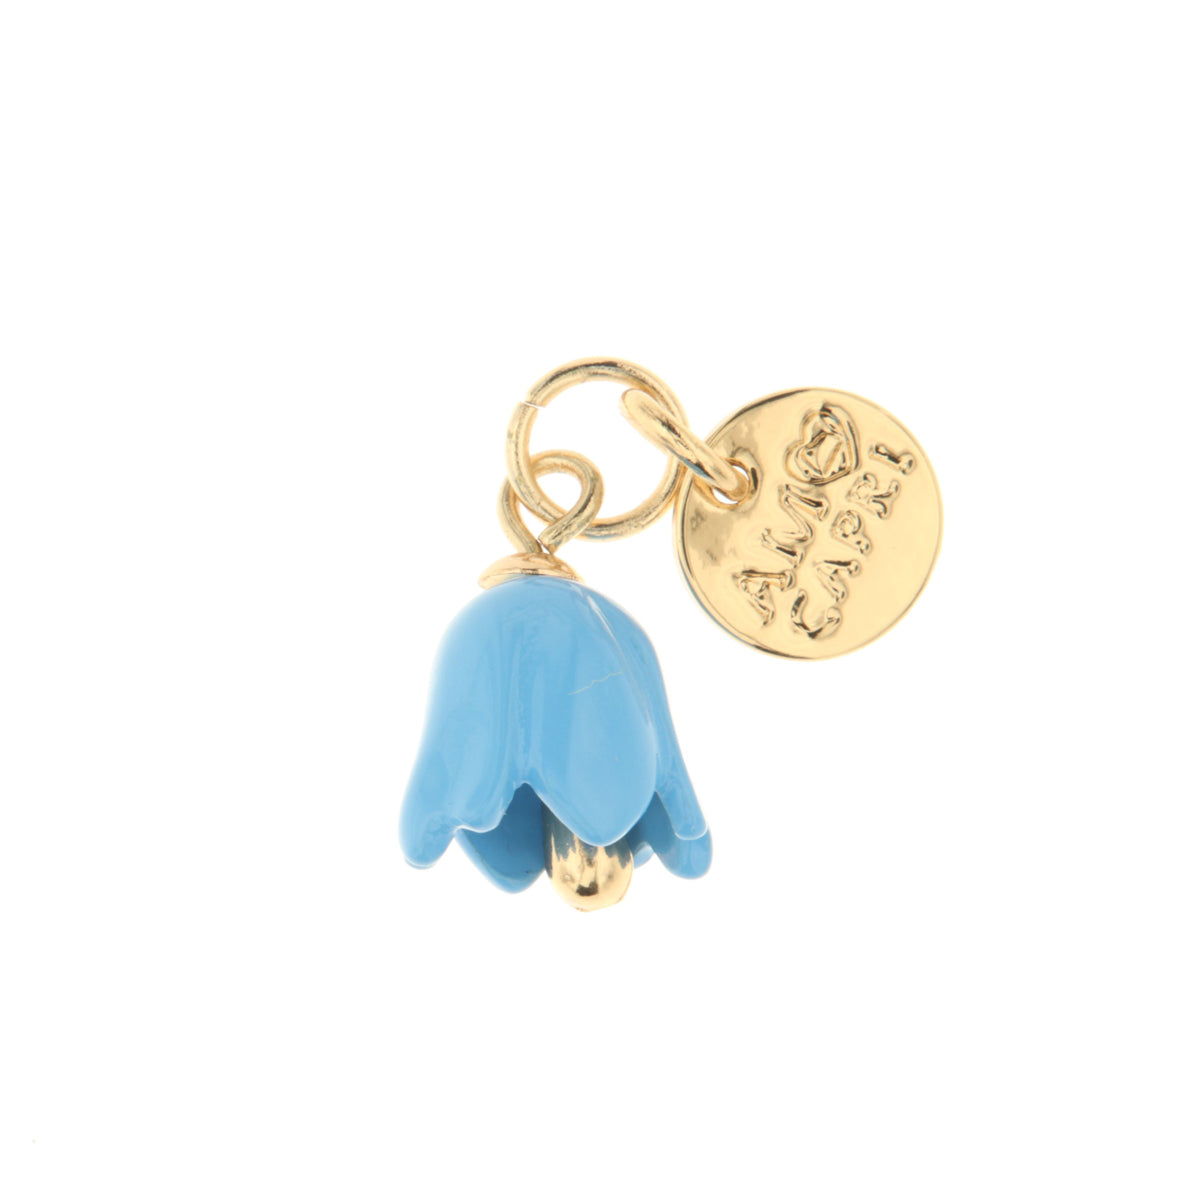 Metal pendant in the shape of a blue bell -shaped embellished with colored glazes